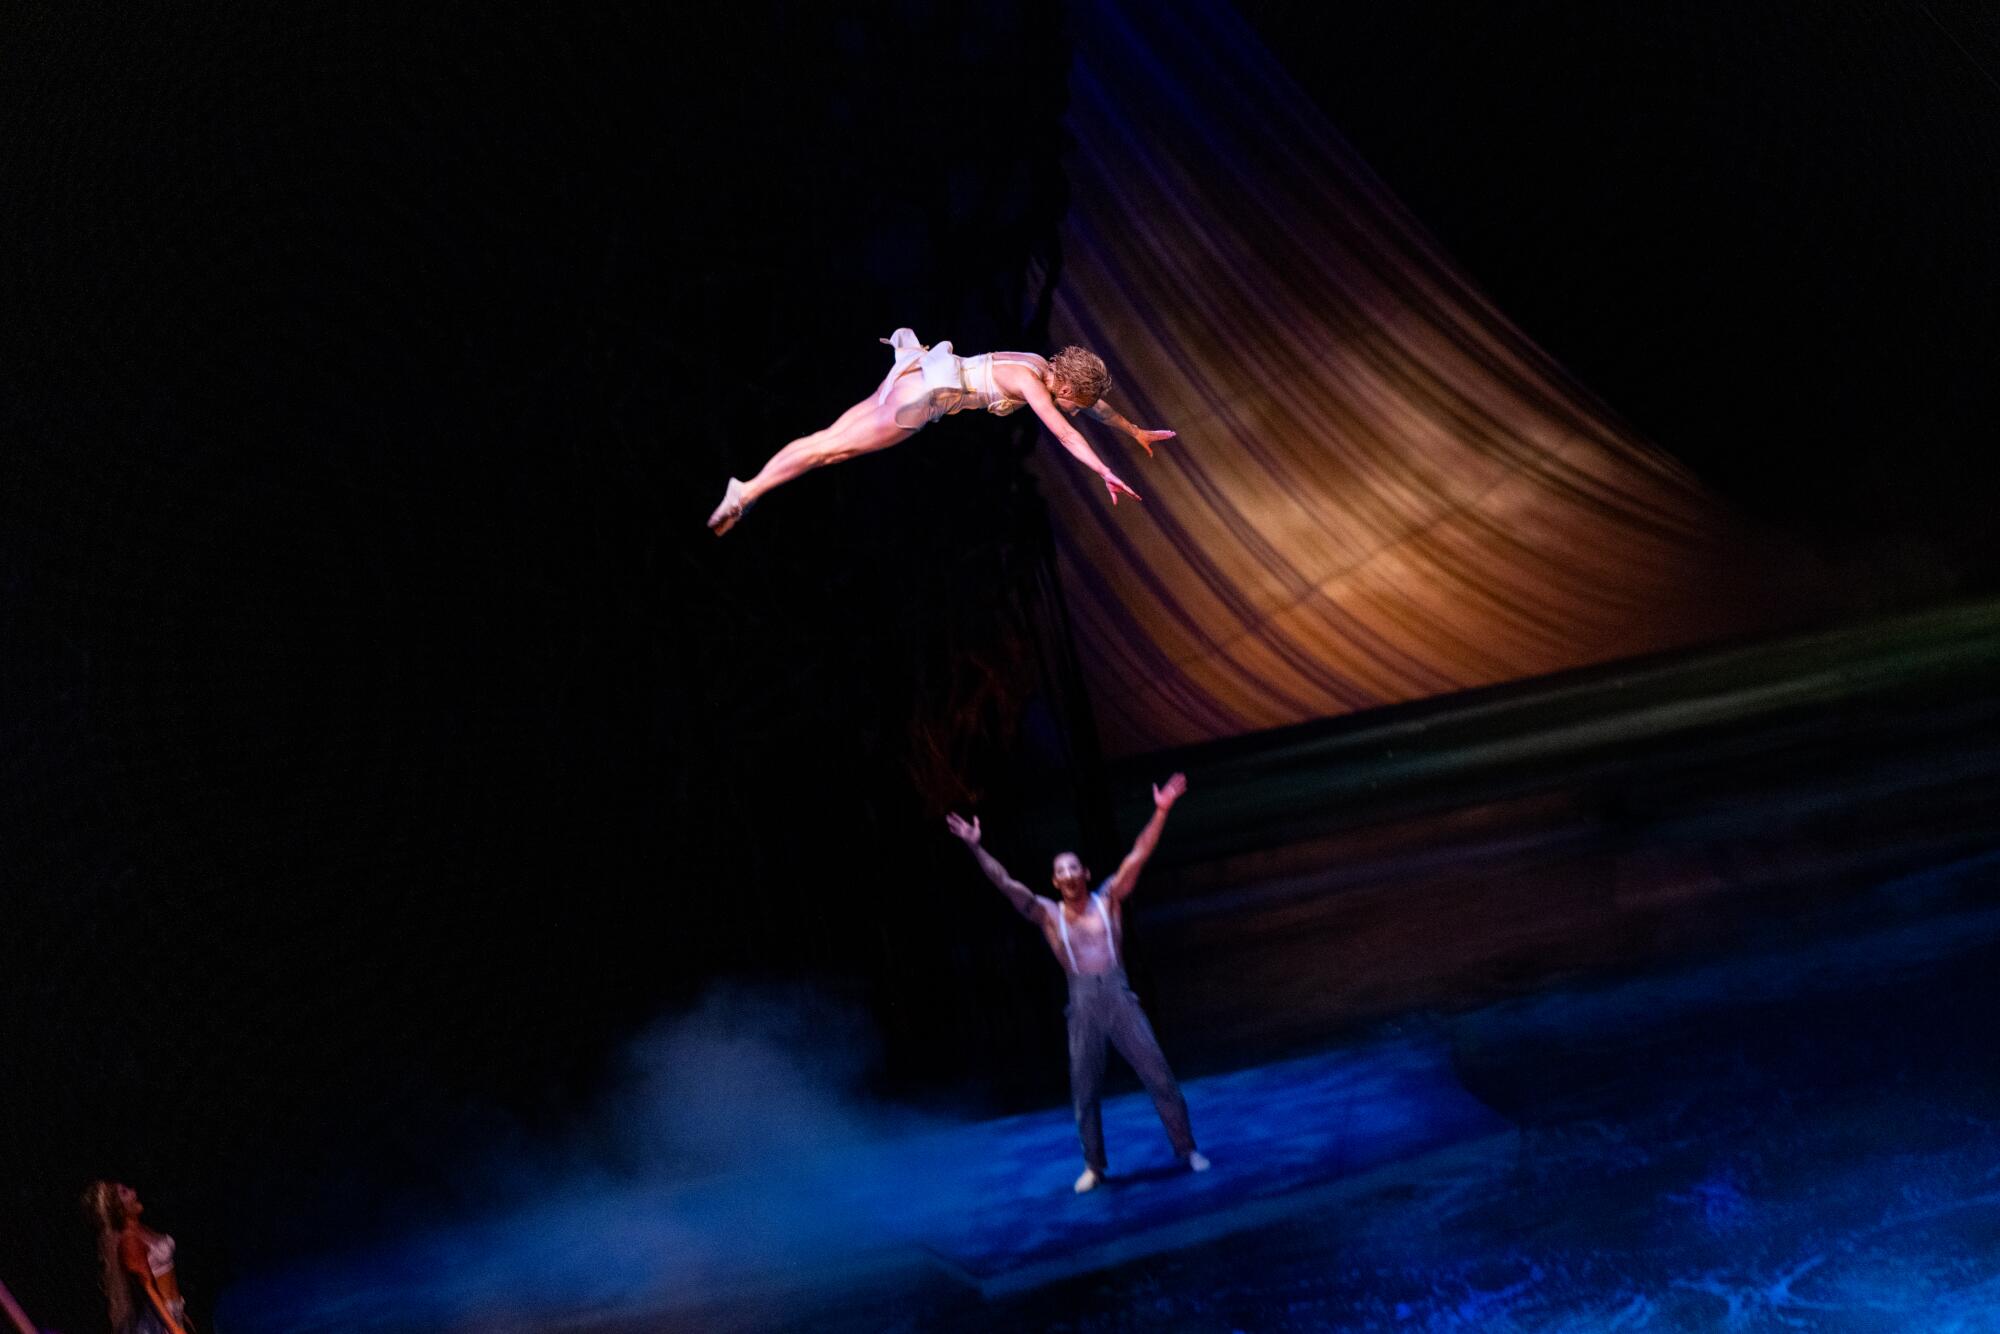 A trapeze artist performs mid-air while another extends his arms onstage during Cirque du Soleil's "O."